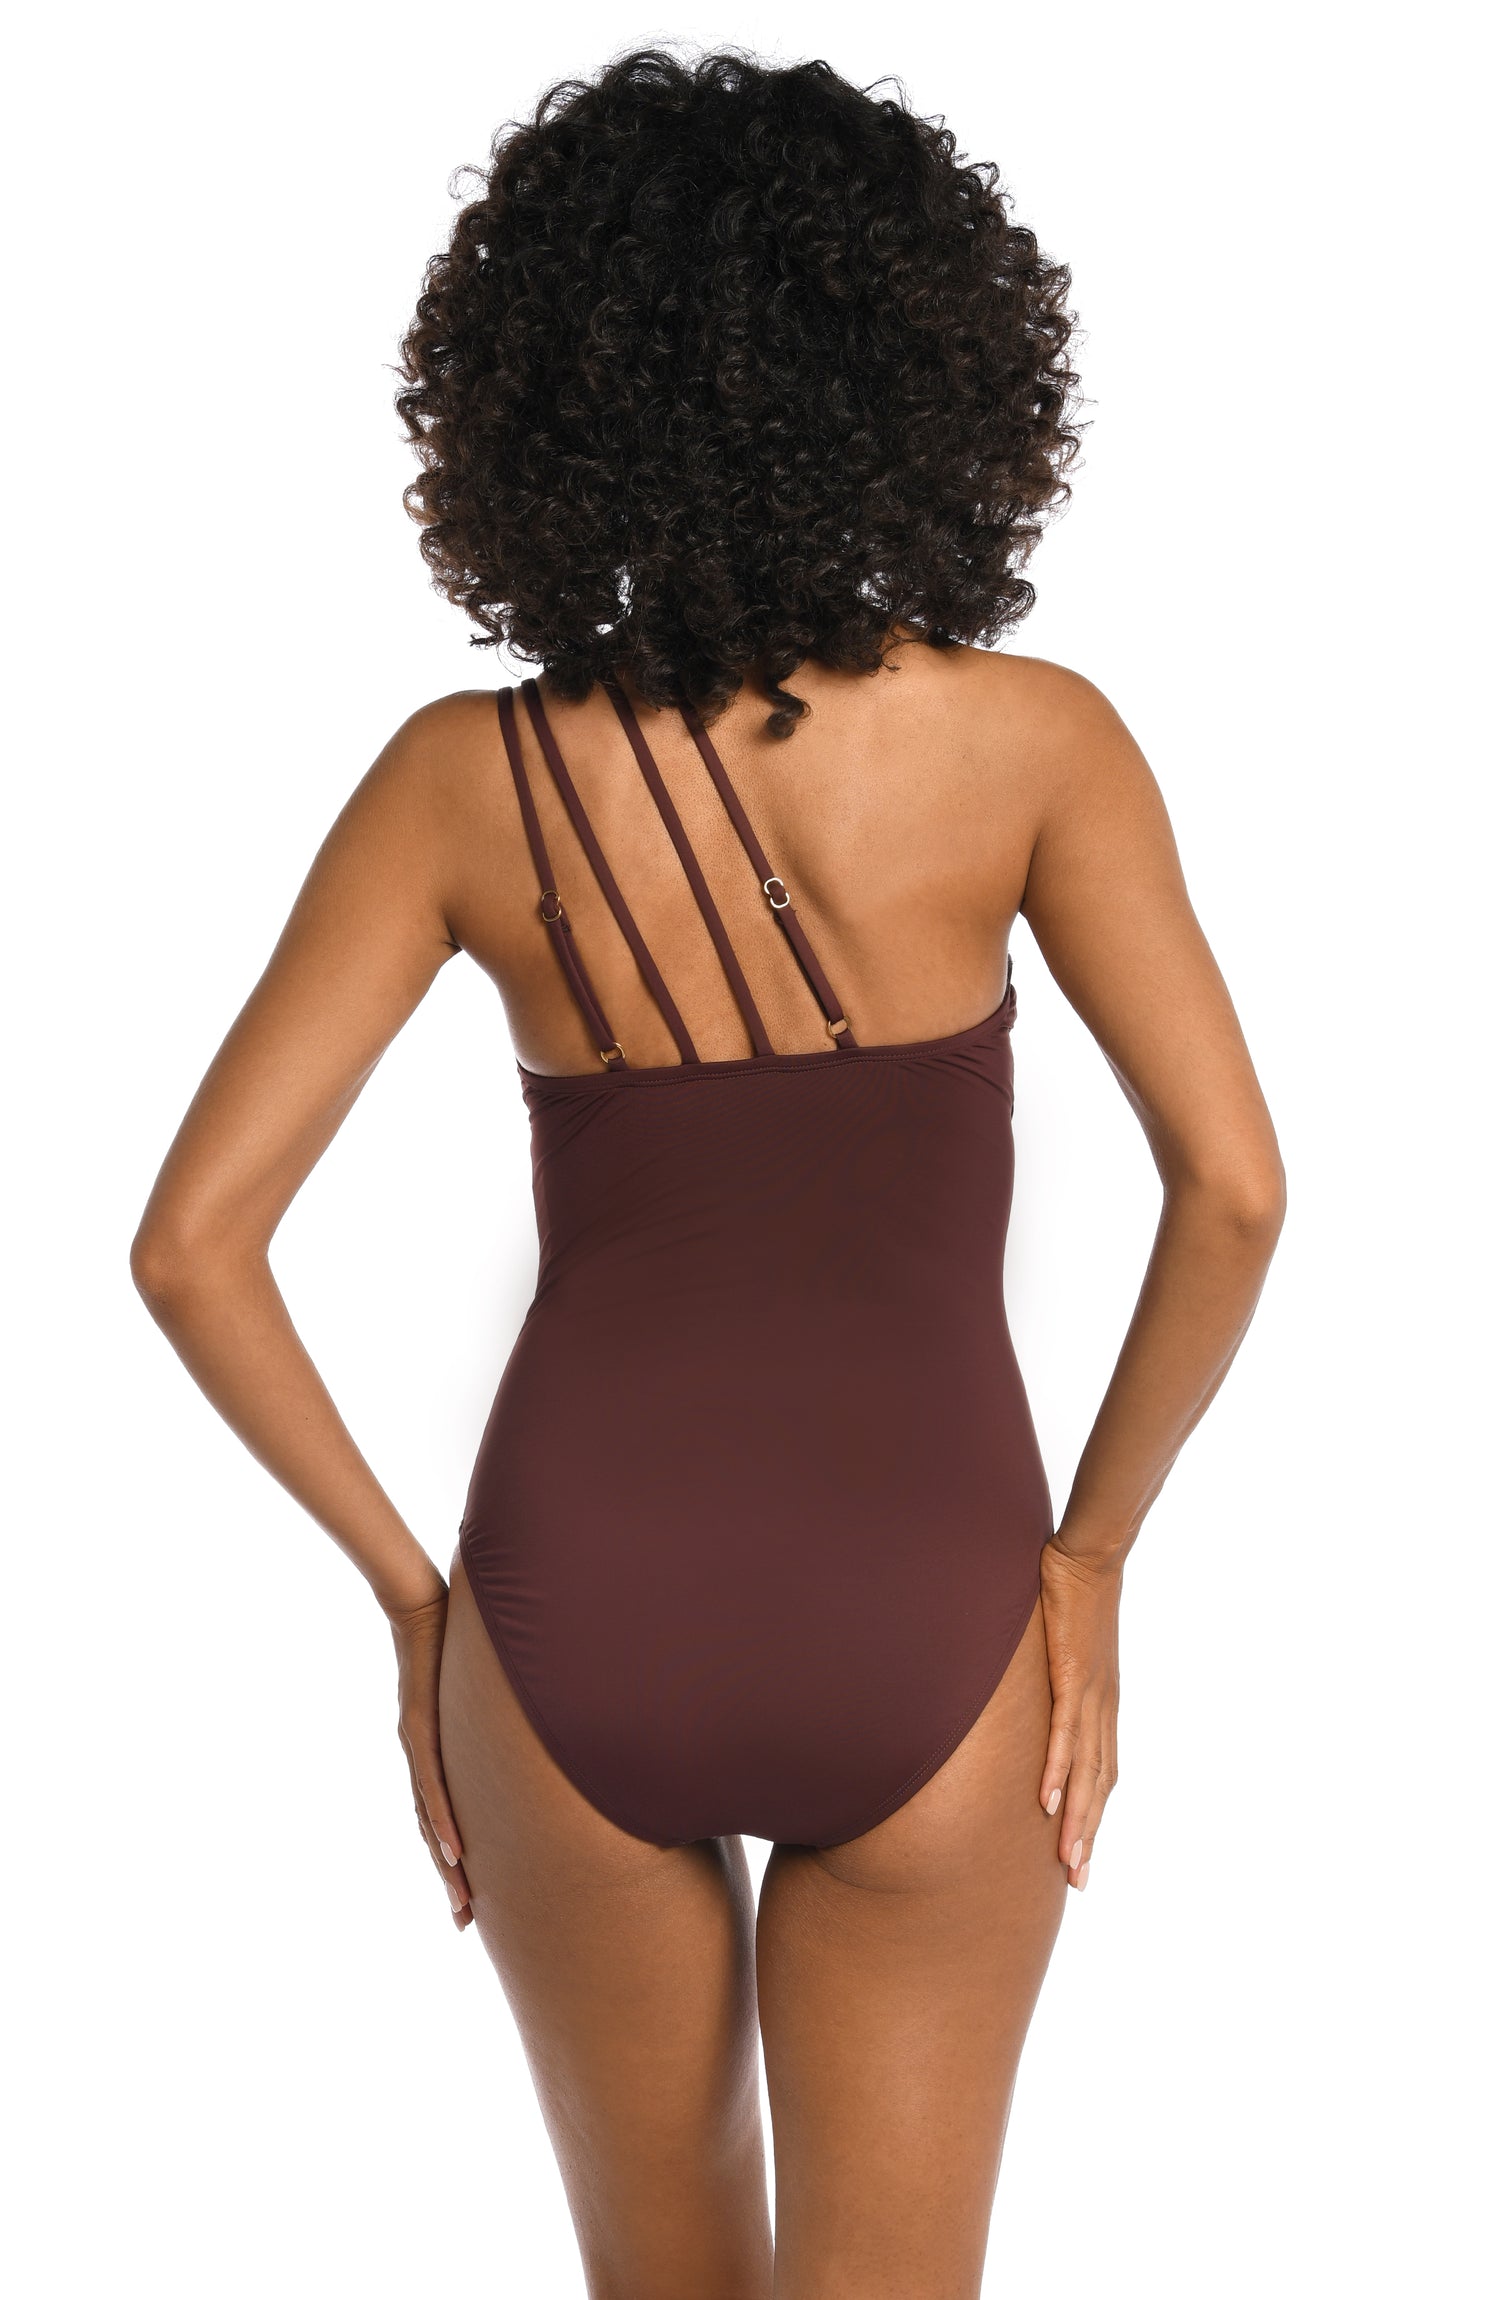 Model is wearing a java colored one piece swimsuit from our Best-Selling Island Goddess collection.